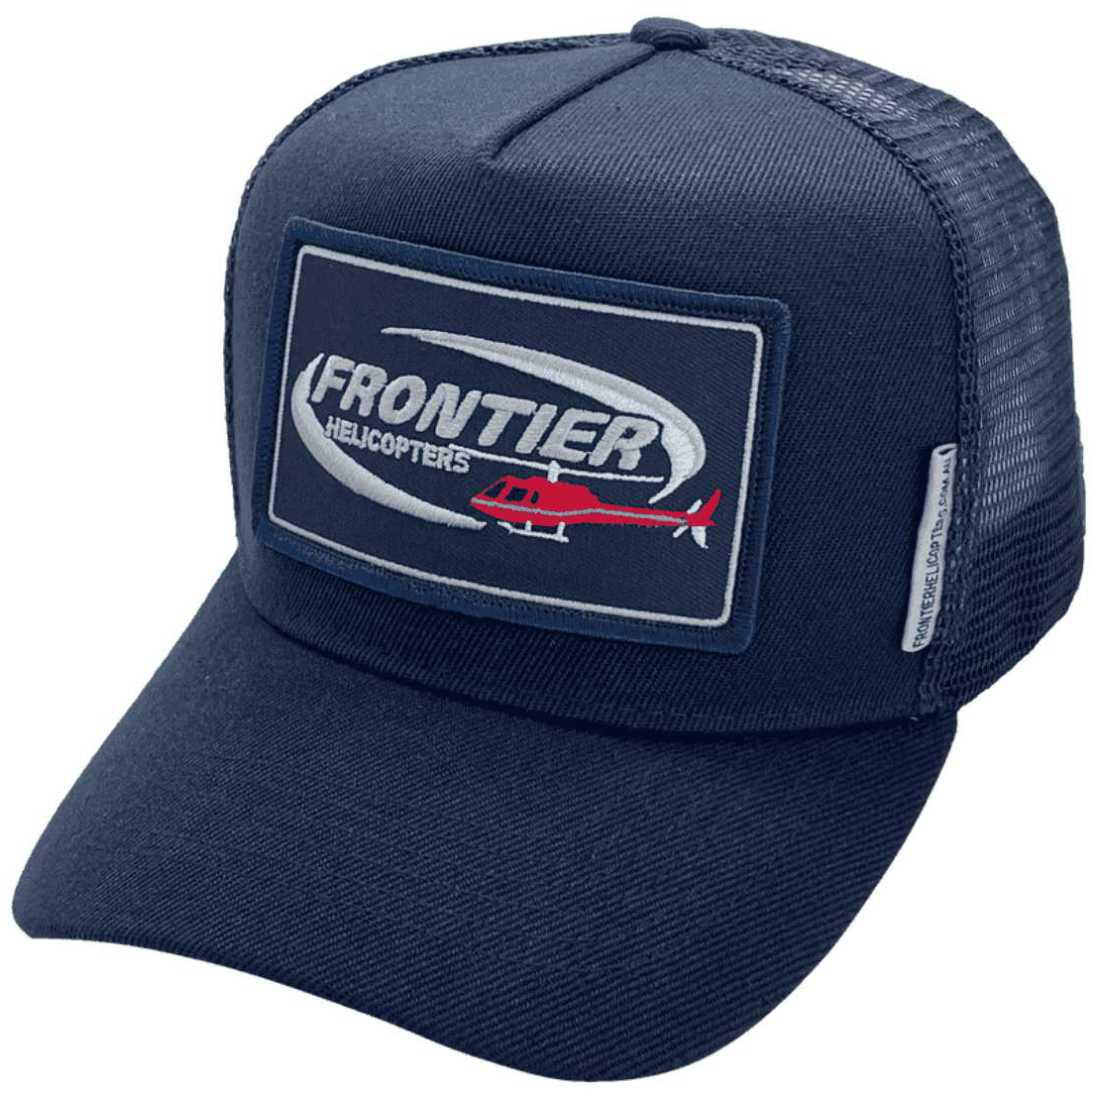 Frontier Helicopters Darby WA HP Original Basic Aussie Trucker Hat snapback with sewn-on embroidered badge and Australian Head Fit